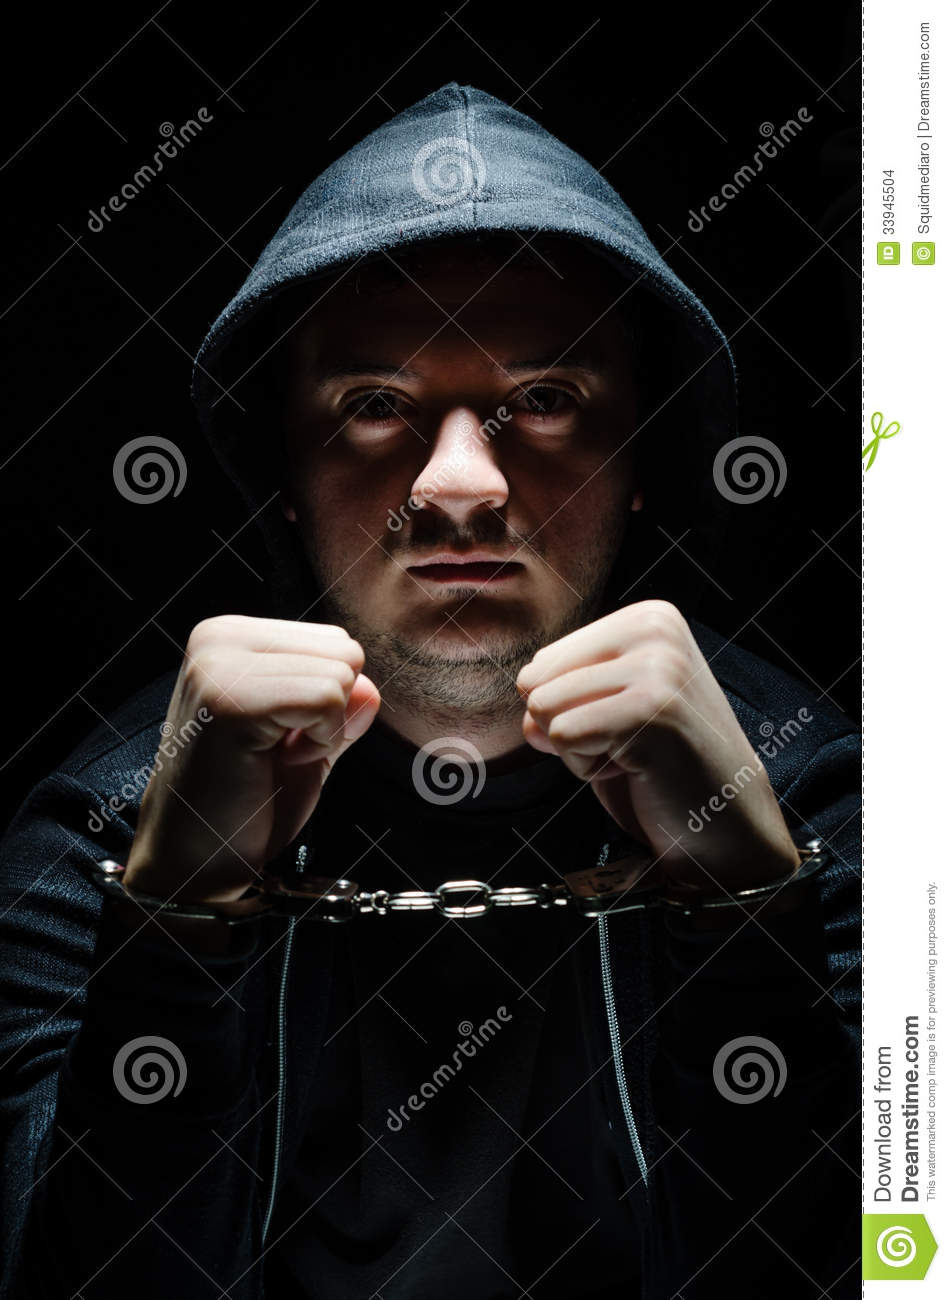 Handcuffed Man Stock Images   Image  33945504